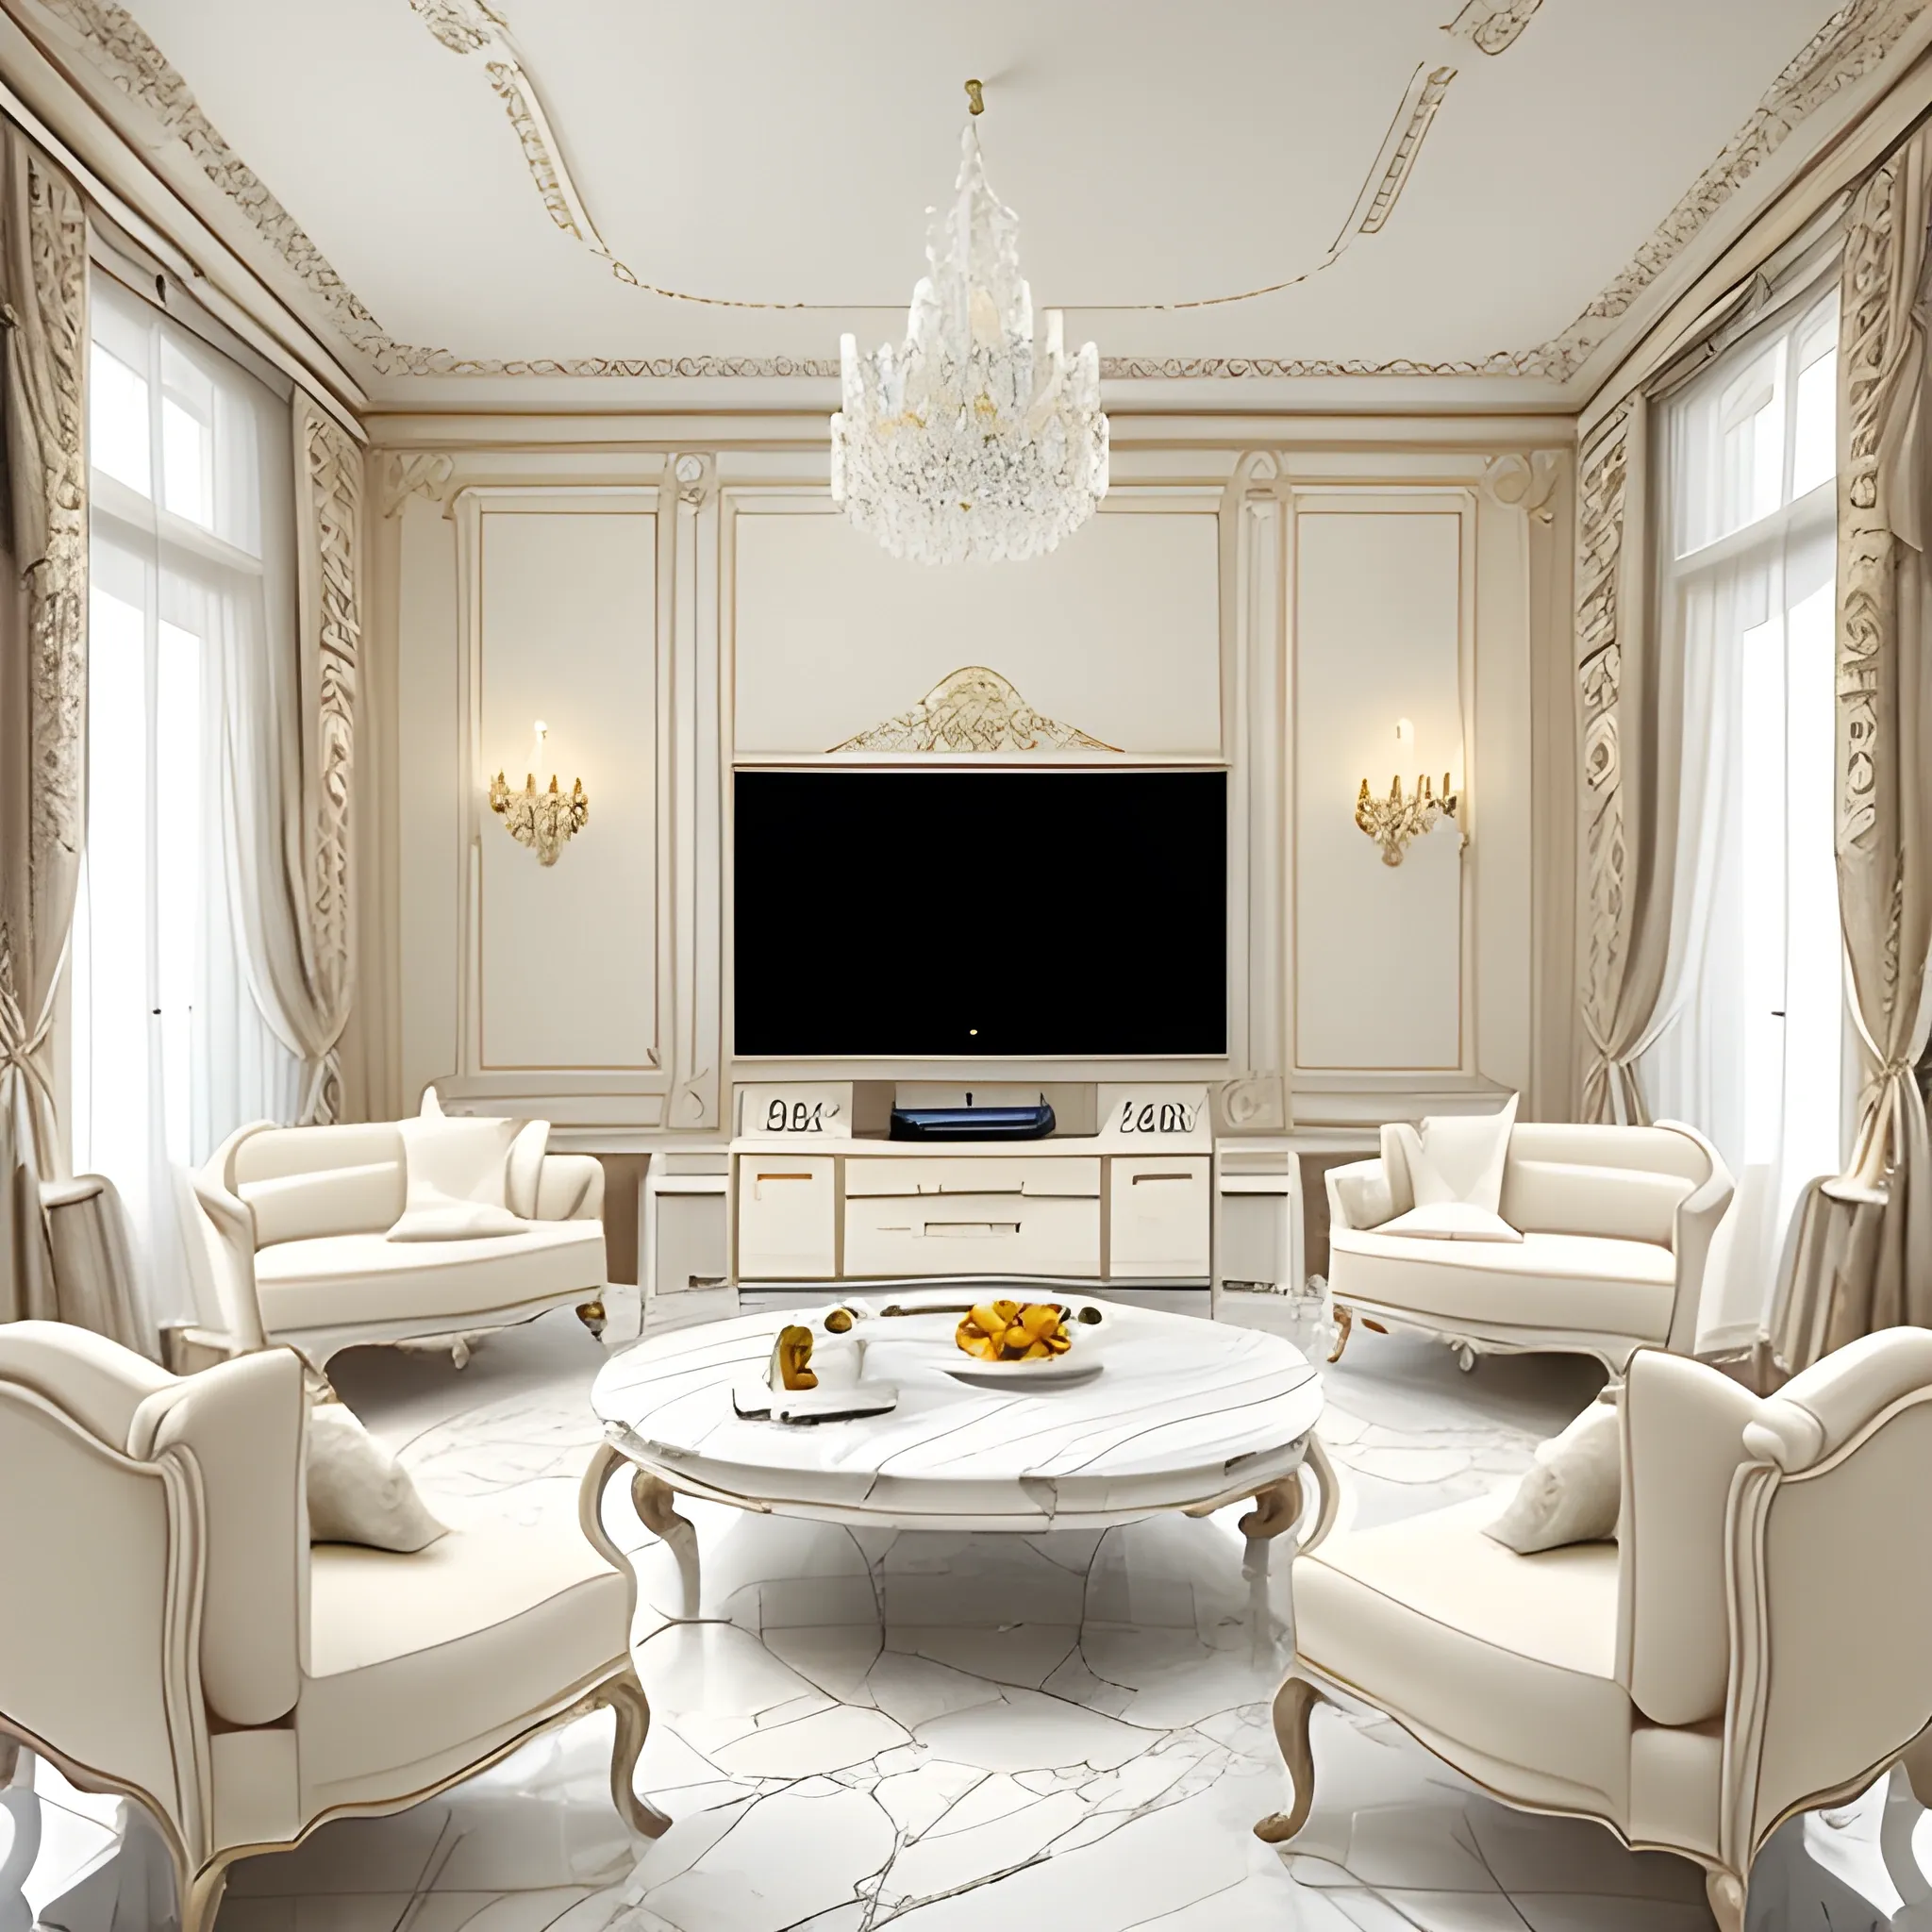 French style living room with a beautiful white marble table between two white sofas, cream floor and wall, half open curtains, 8k resolution, professional interior design photo